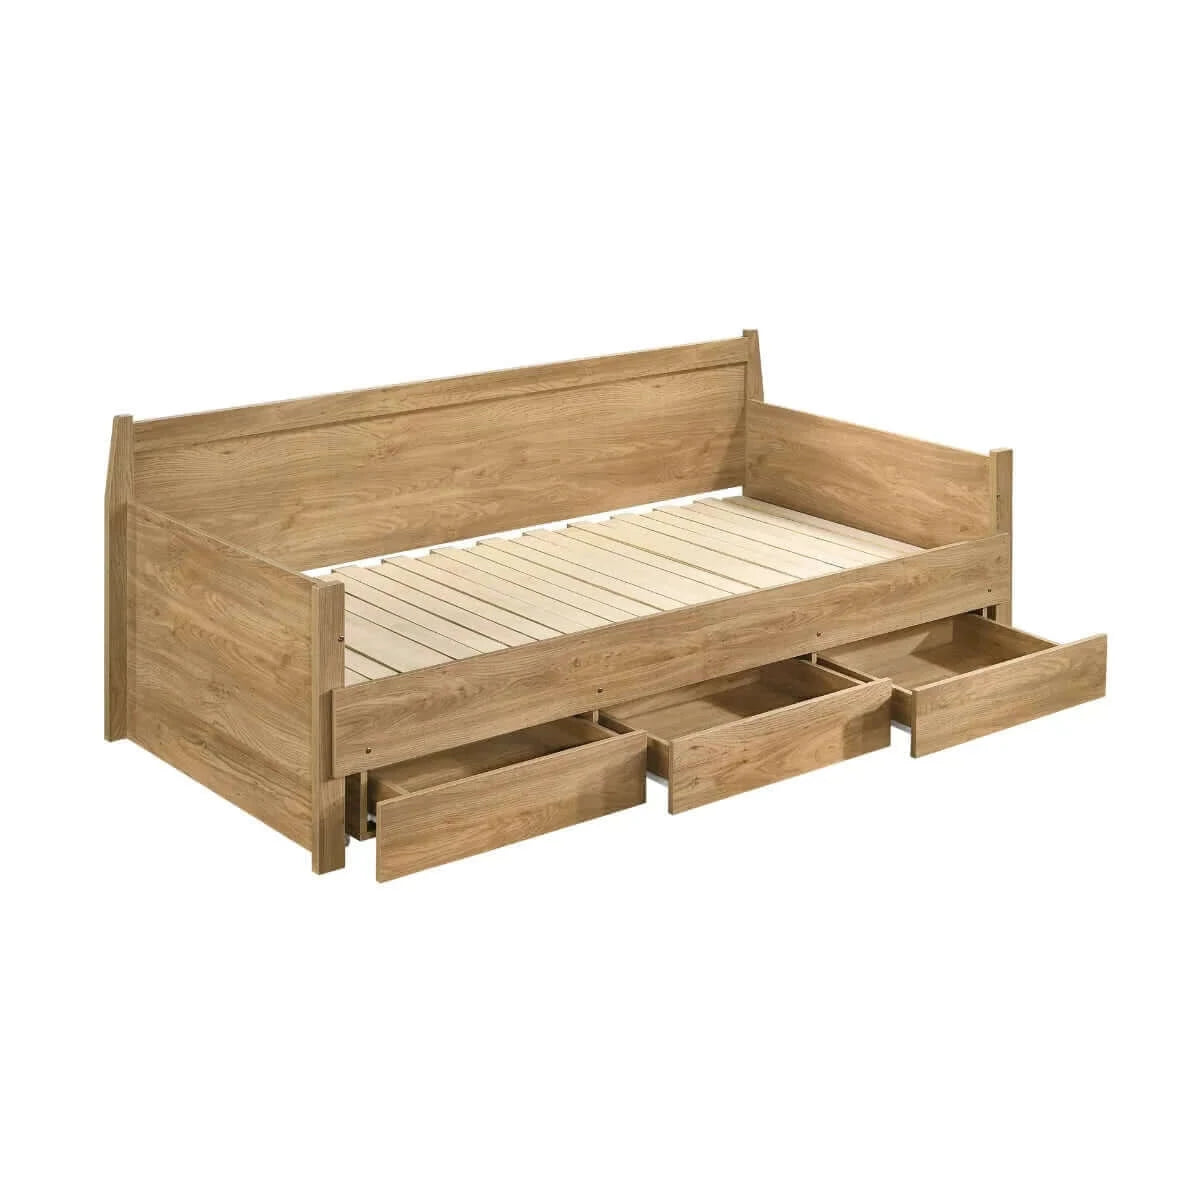 Buy mica natural wooden day bed with 3 drawers sofa bed frame - upinteriors-Upinteriors